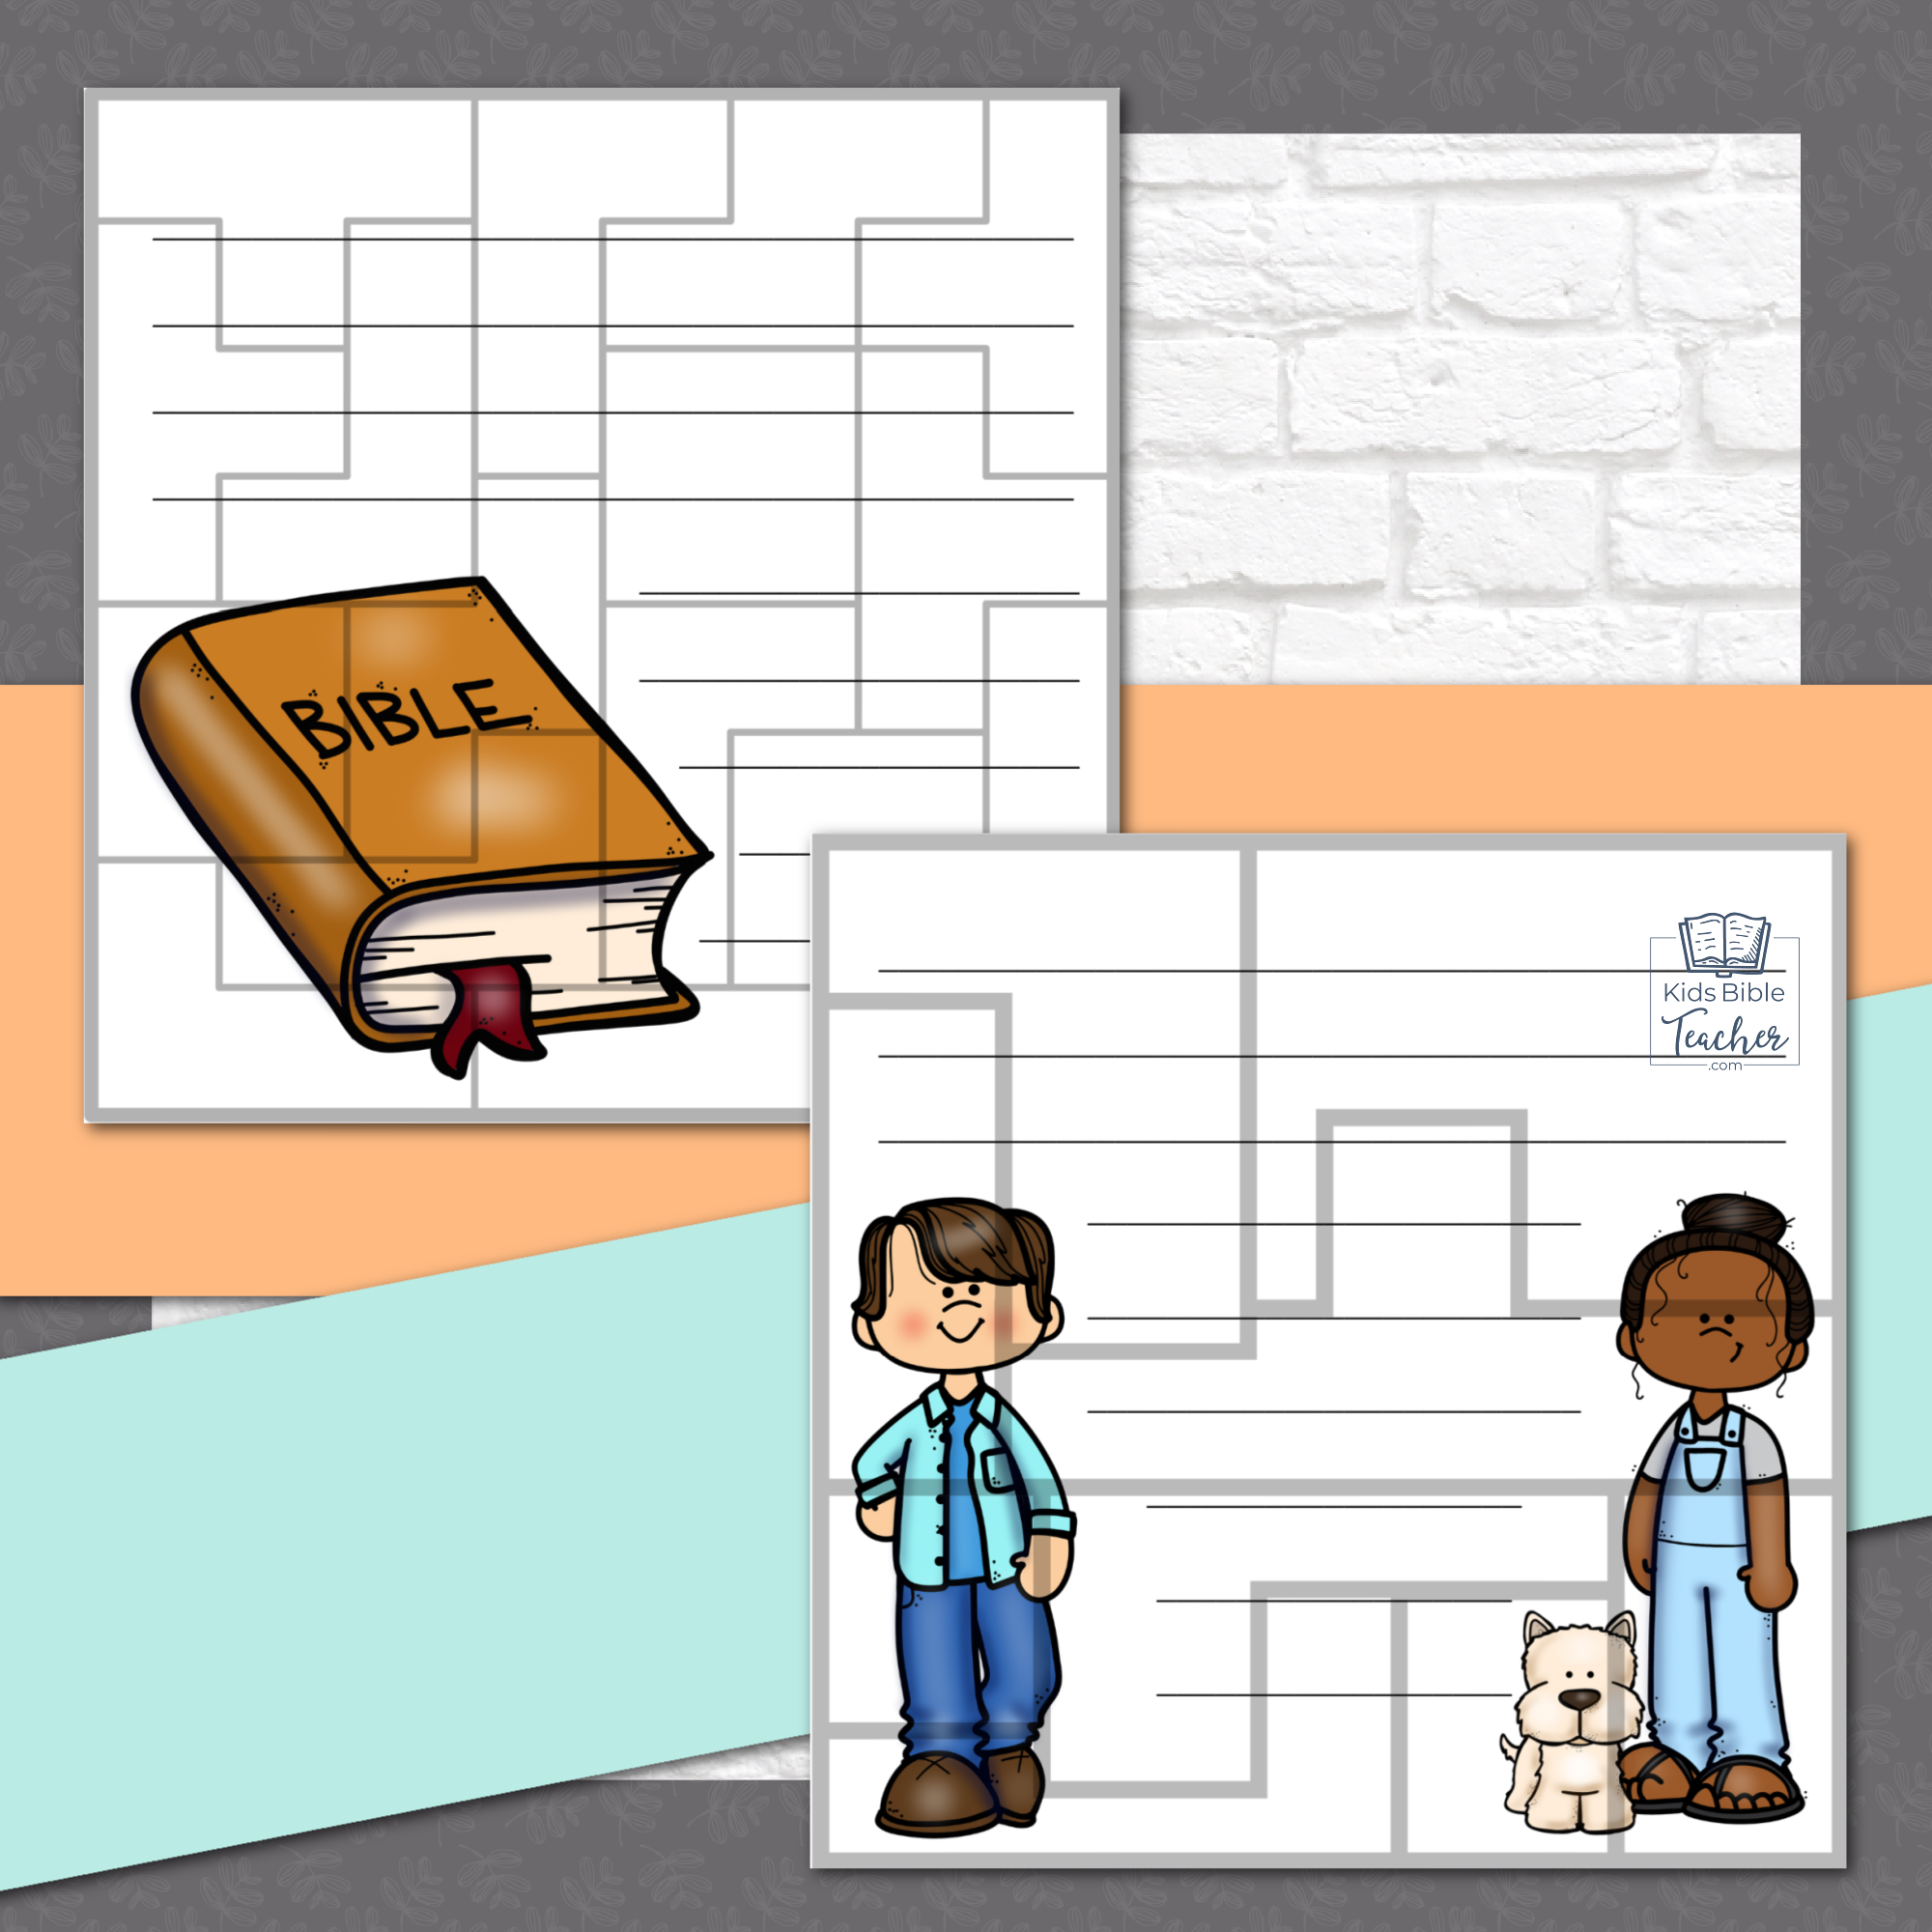 8 Bible Memory Verse Puzzles for 3rd and 4rth Graders